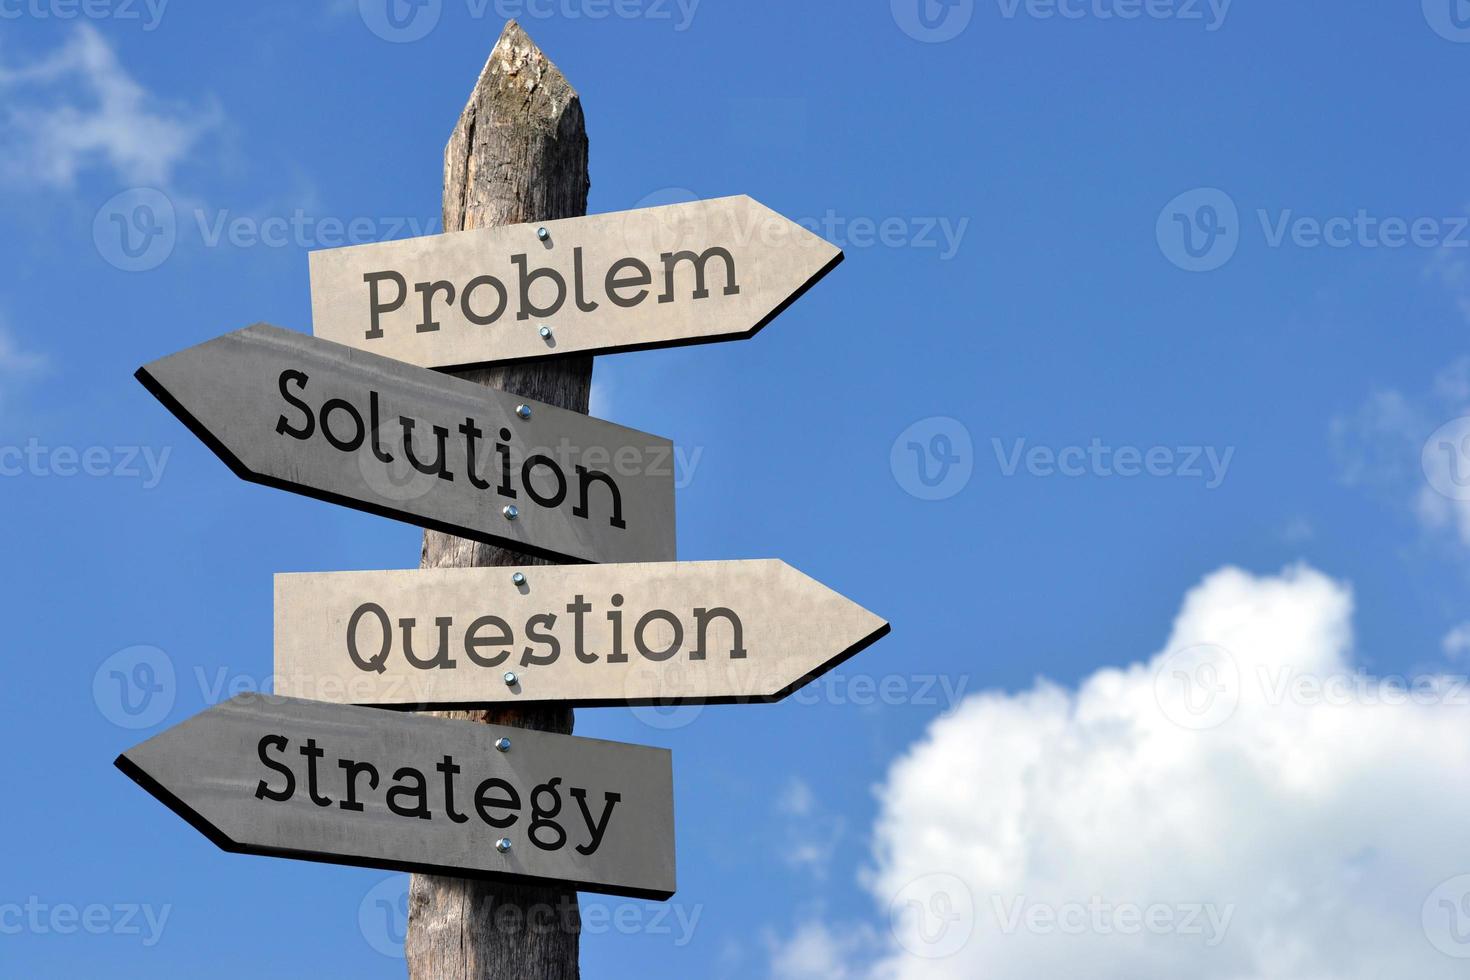 Problem, Solution, Question, Strategy - Wooden Signpost with Four Arrows, Sky with Clouds photo